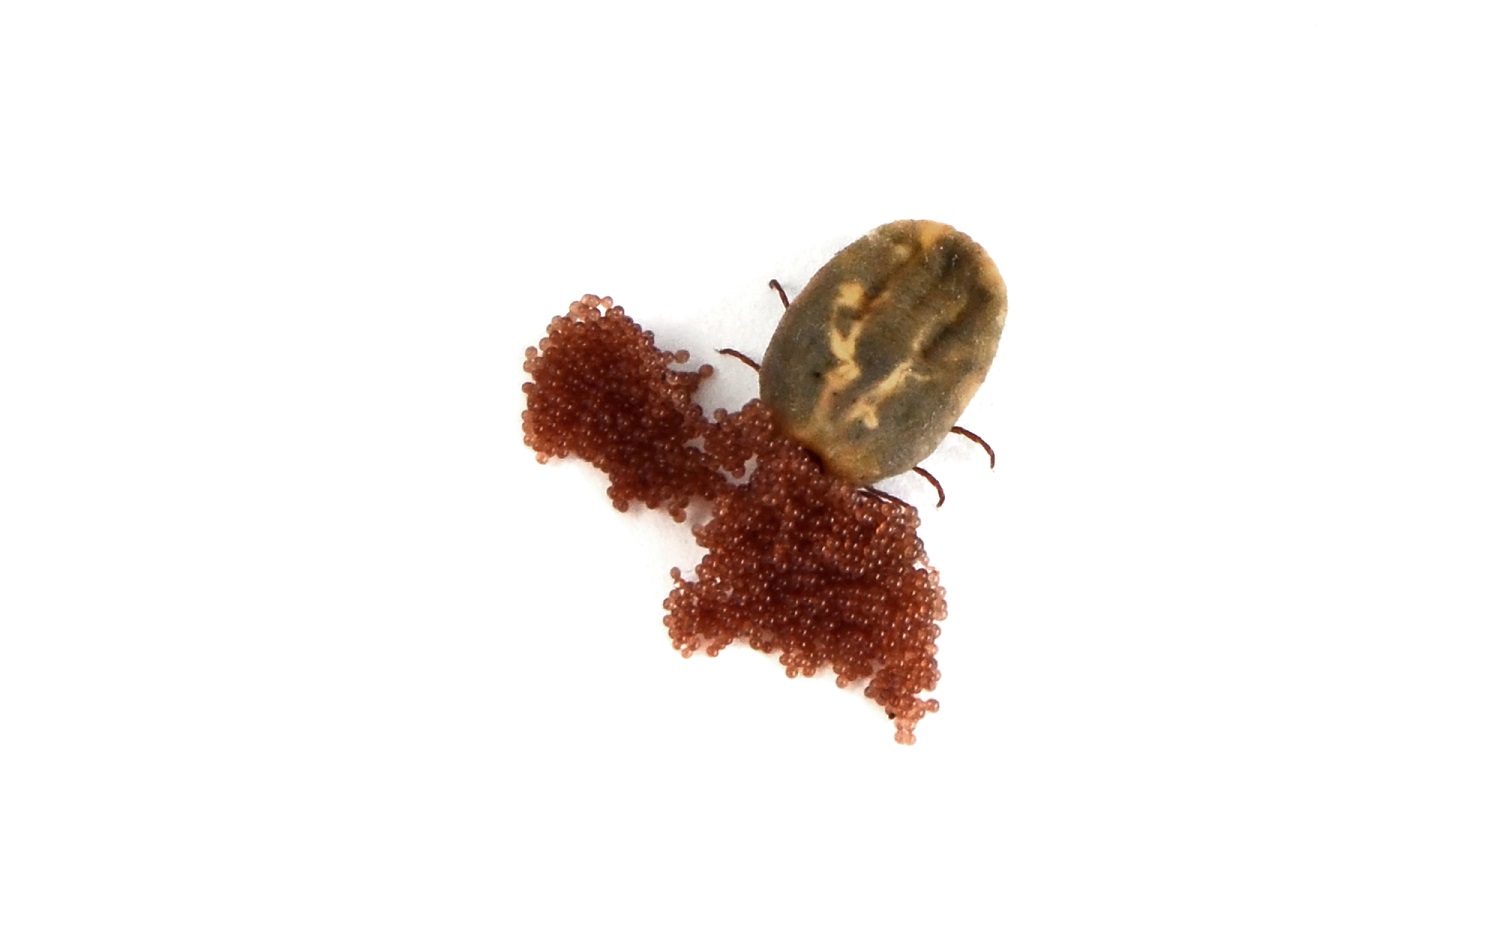 Female deer tick or black-legged tick with a brown egg mass on a white background